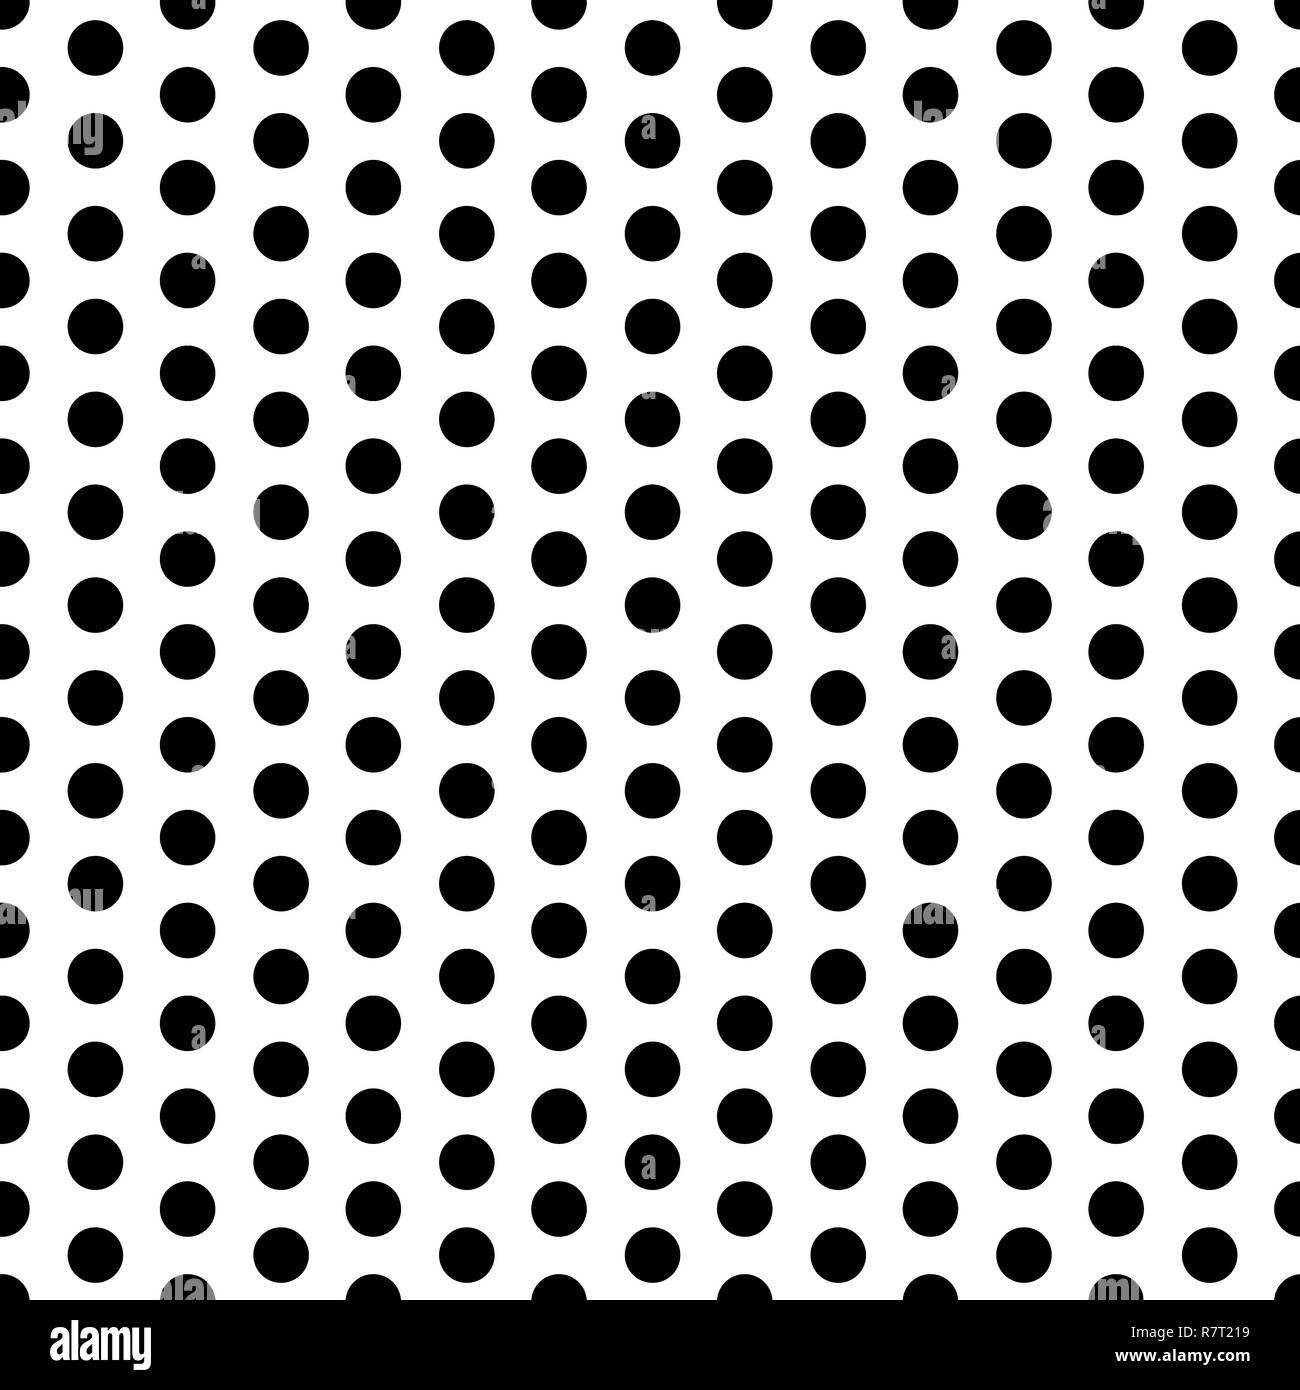 Seamless polka dot pattern black and white. Design for wallpaper, fabric,  textile, wrapping. Simple background Stock Photo - Alamy